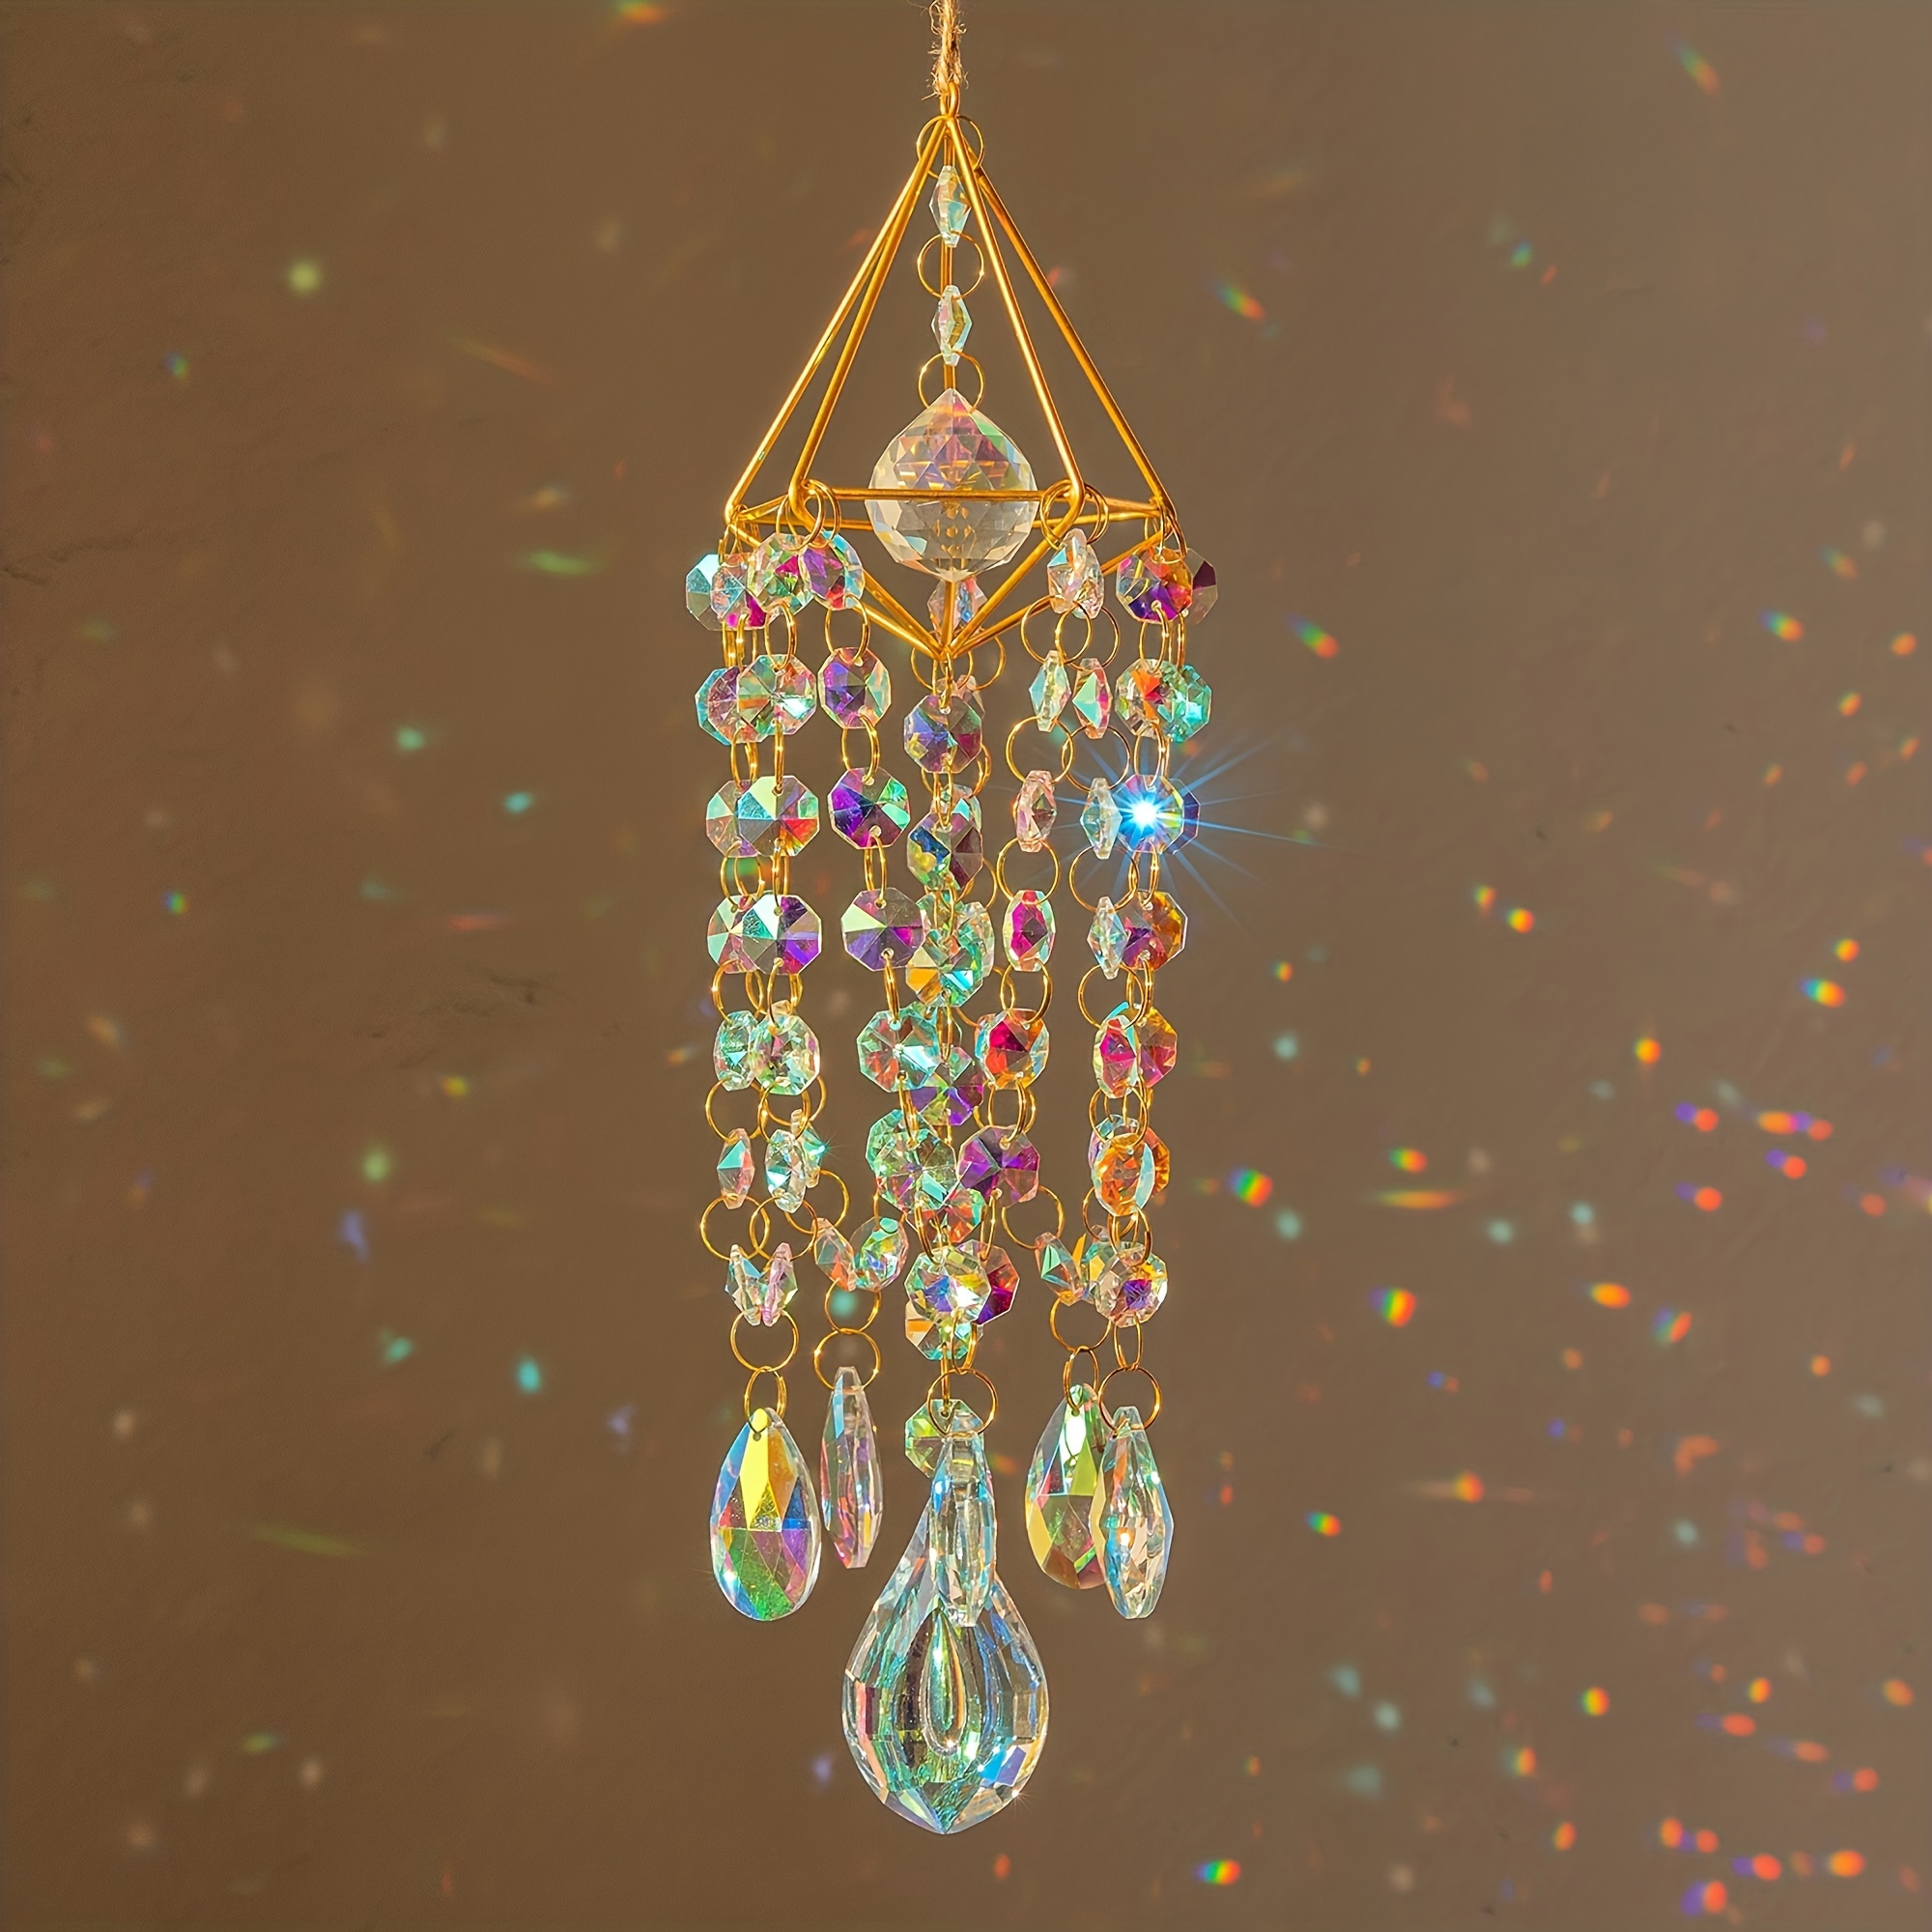 

Handmade Gold Crystal Suncatcher Hanging Wind Chime, Garden Rainbow Maker With Glass Beads, Decorative Sun Catcher For Outdoor Patio Display